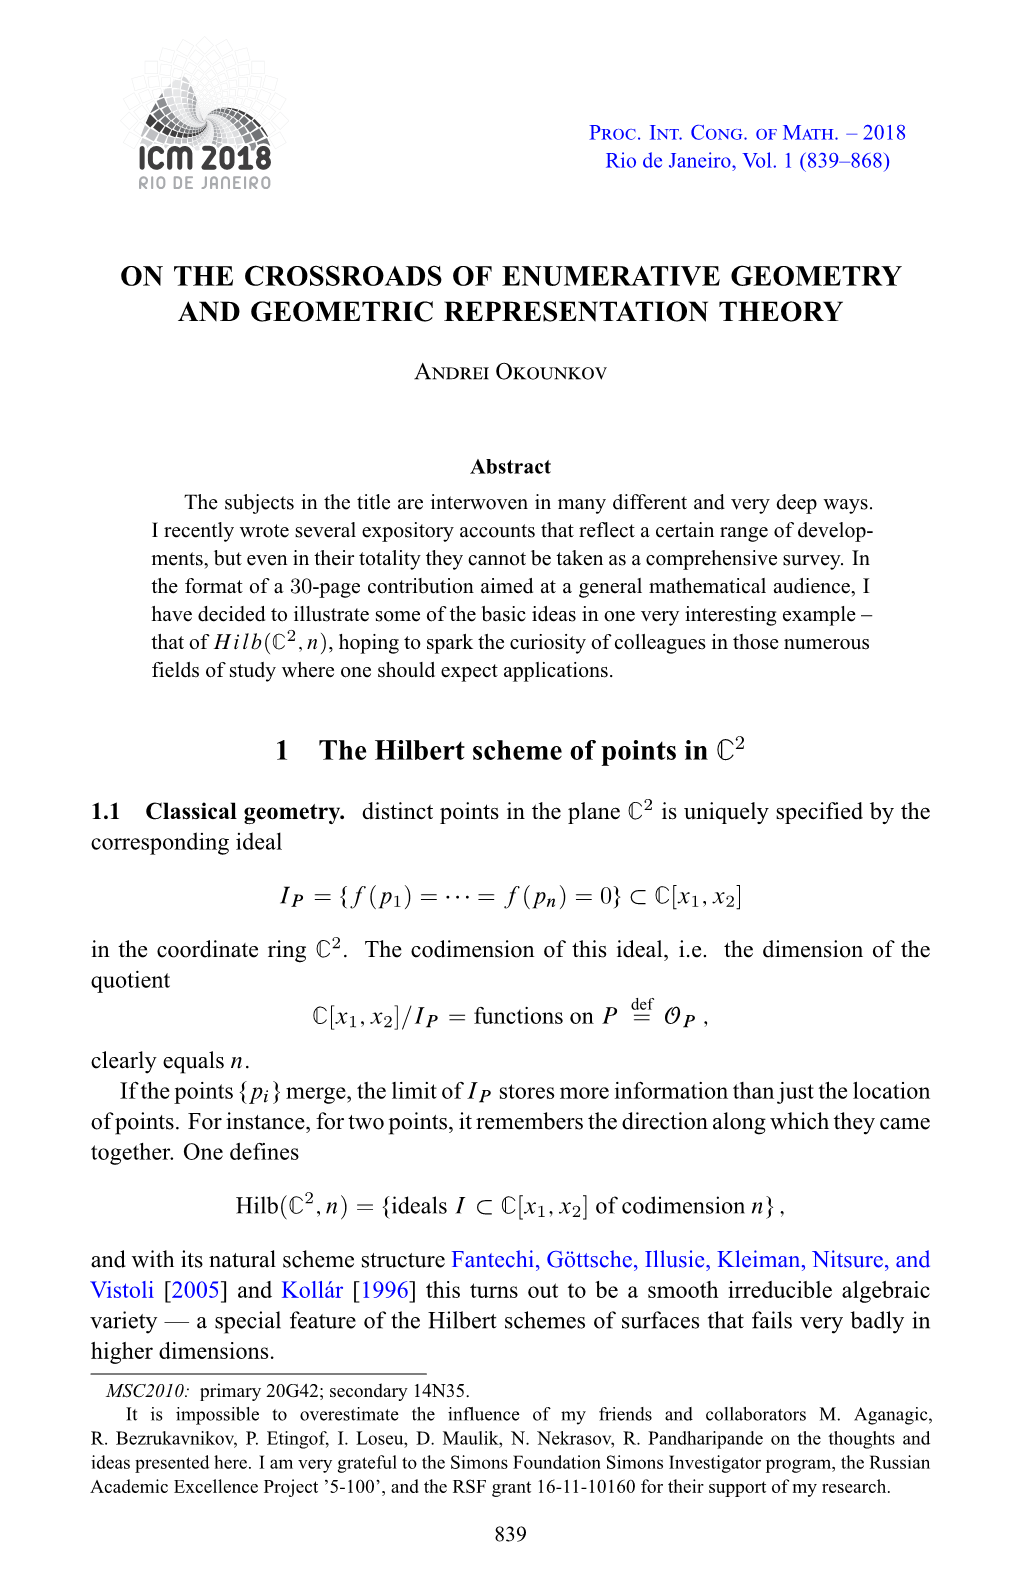 On the Crossroads of Enumerative Geometry and Geometric Representation Theory